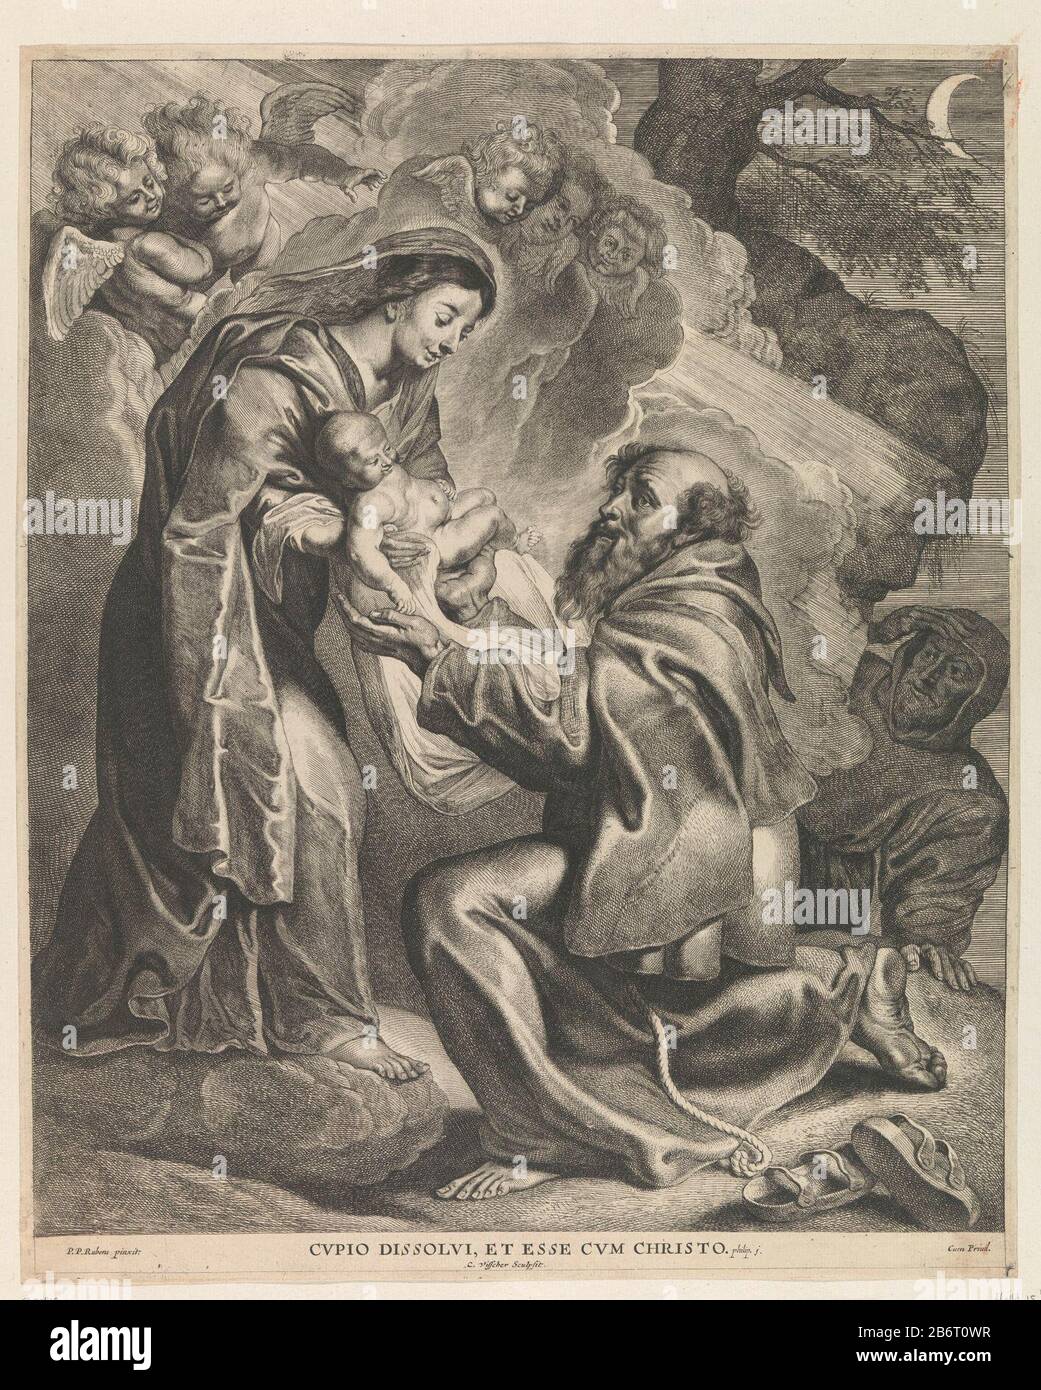 H Franciscus ontvangt het Christuskind uit Maria's armen St. Francis receives the Christ Child in Mary's arms Object type: picture Item number: RP-P-OB-75.820Catalogusreferentie: Hollstein Dutch 15-4 (4) Description: The St. Francis of Assisi is in a rocky landscape and a vision that Mary him the Christ child hands so he put it in his arms can houden. Manufacturer : printmaker Cornelis Visscher (II) (listed building) to painting by Peter Paul Rubens (listed property) provider of privilege: unknown (reported object) Place manufacture: Northern Netherlands Date: 1638 - 1658 Physical features: et Stock Photo